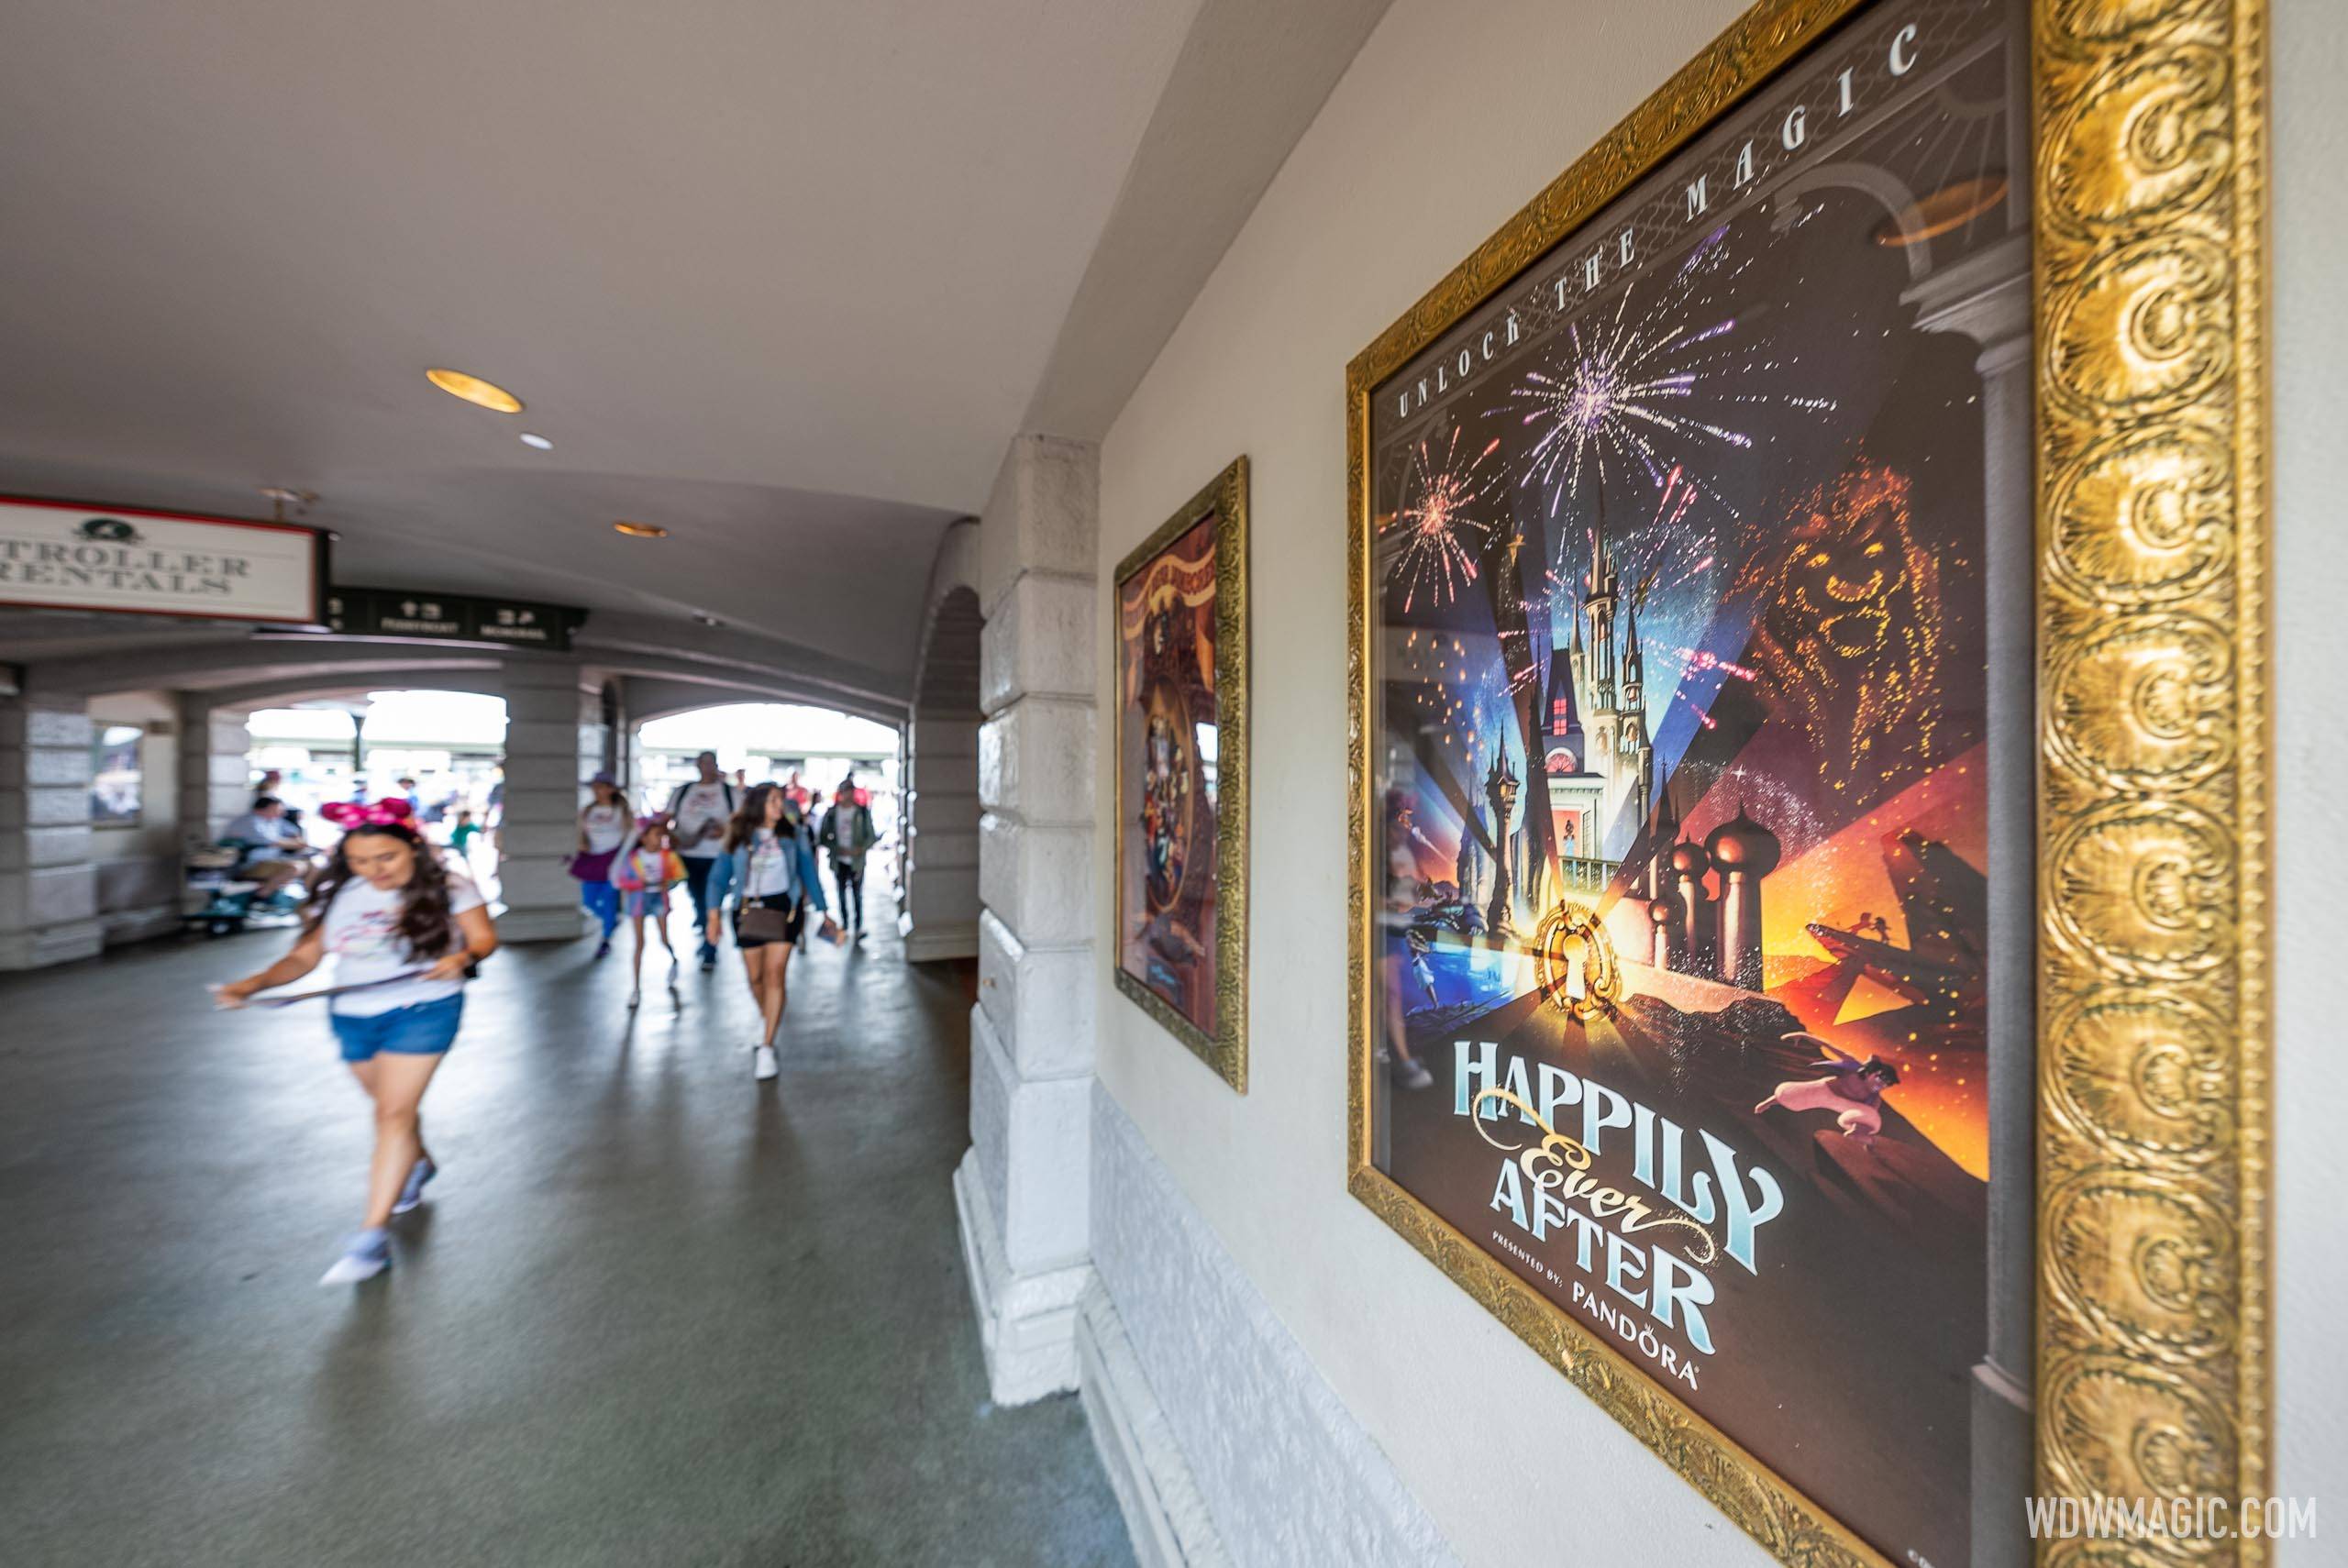 Happily Ever After poster at Main Street U.S.A. train station